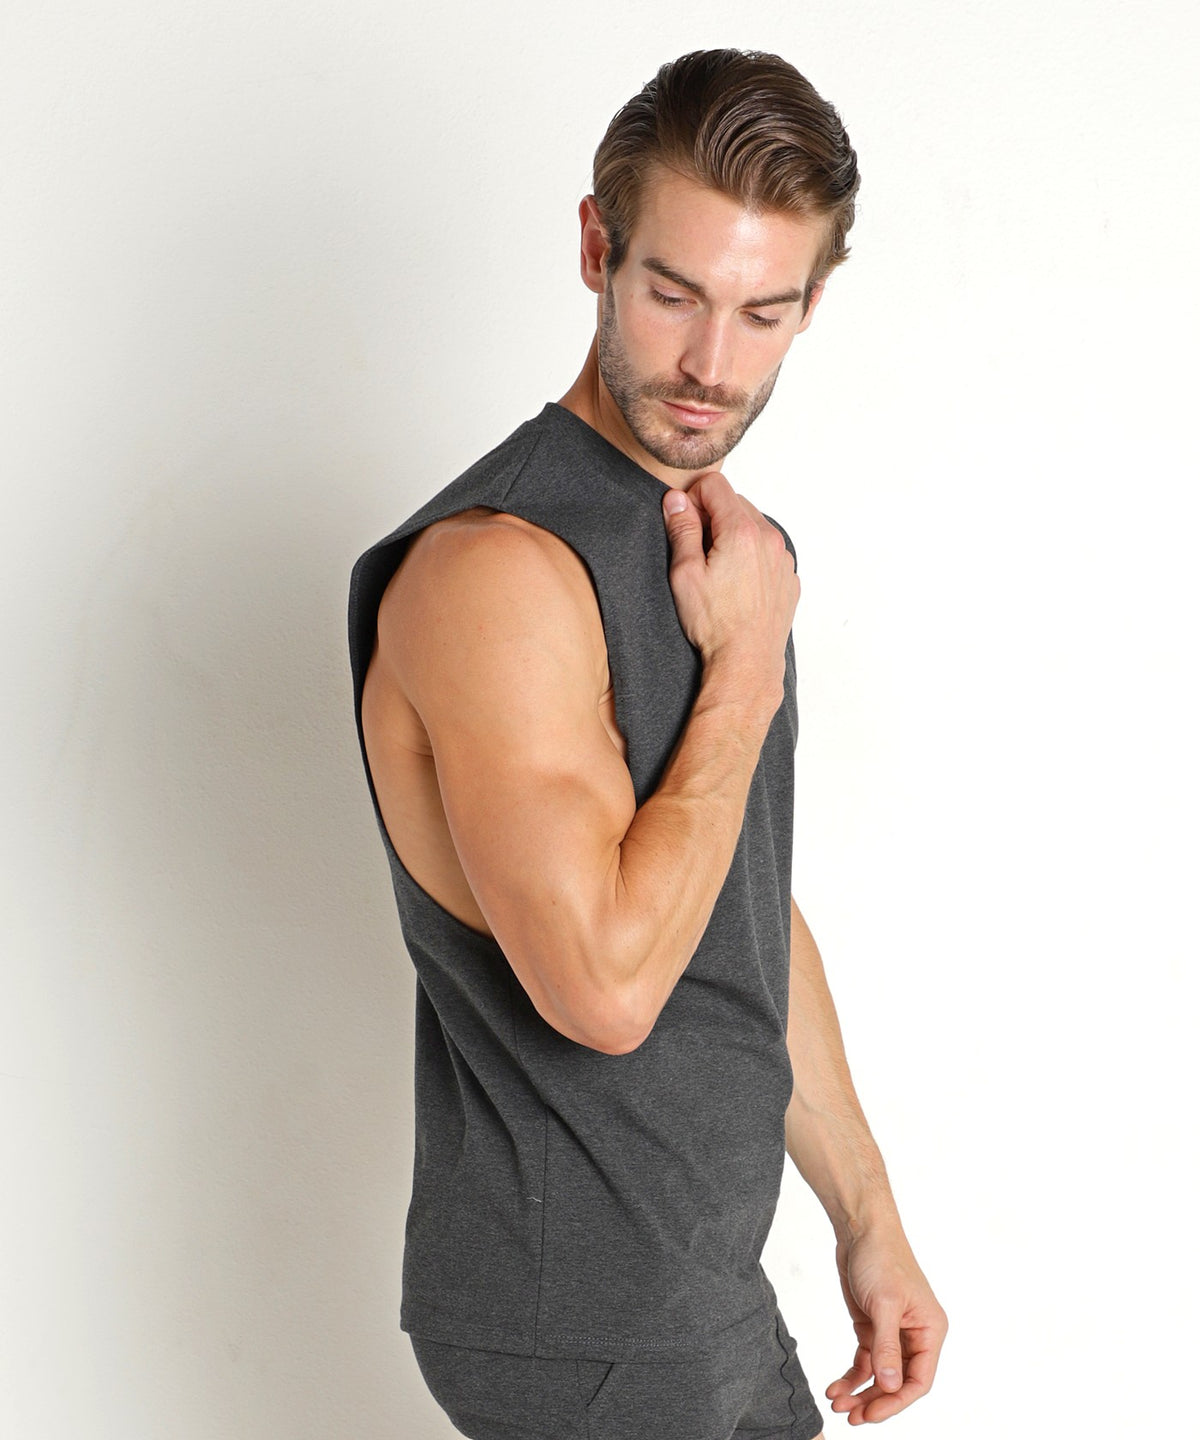 Deep Cut Out Muscle Shirt (Charcoal Heather)